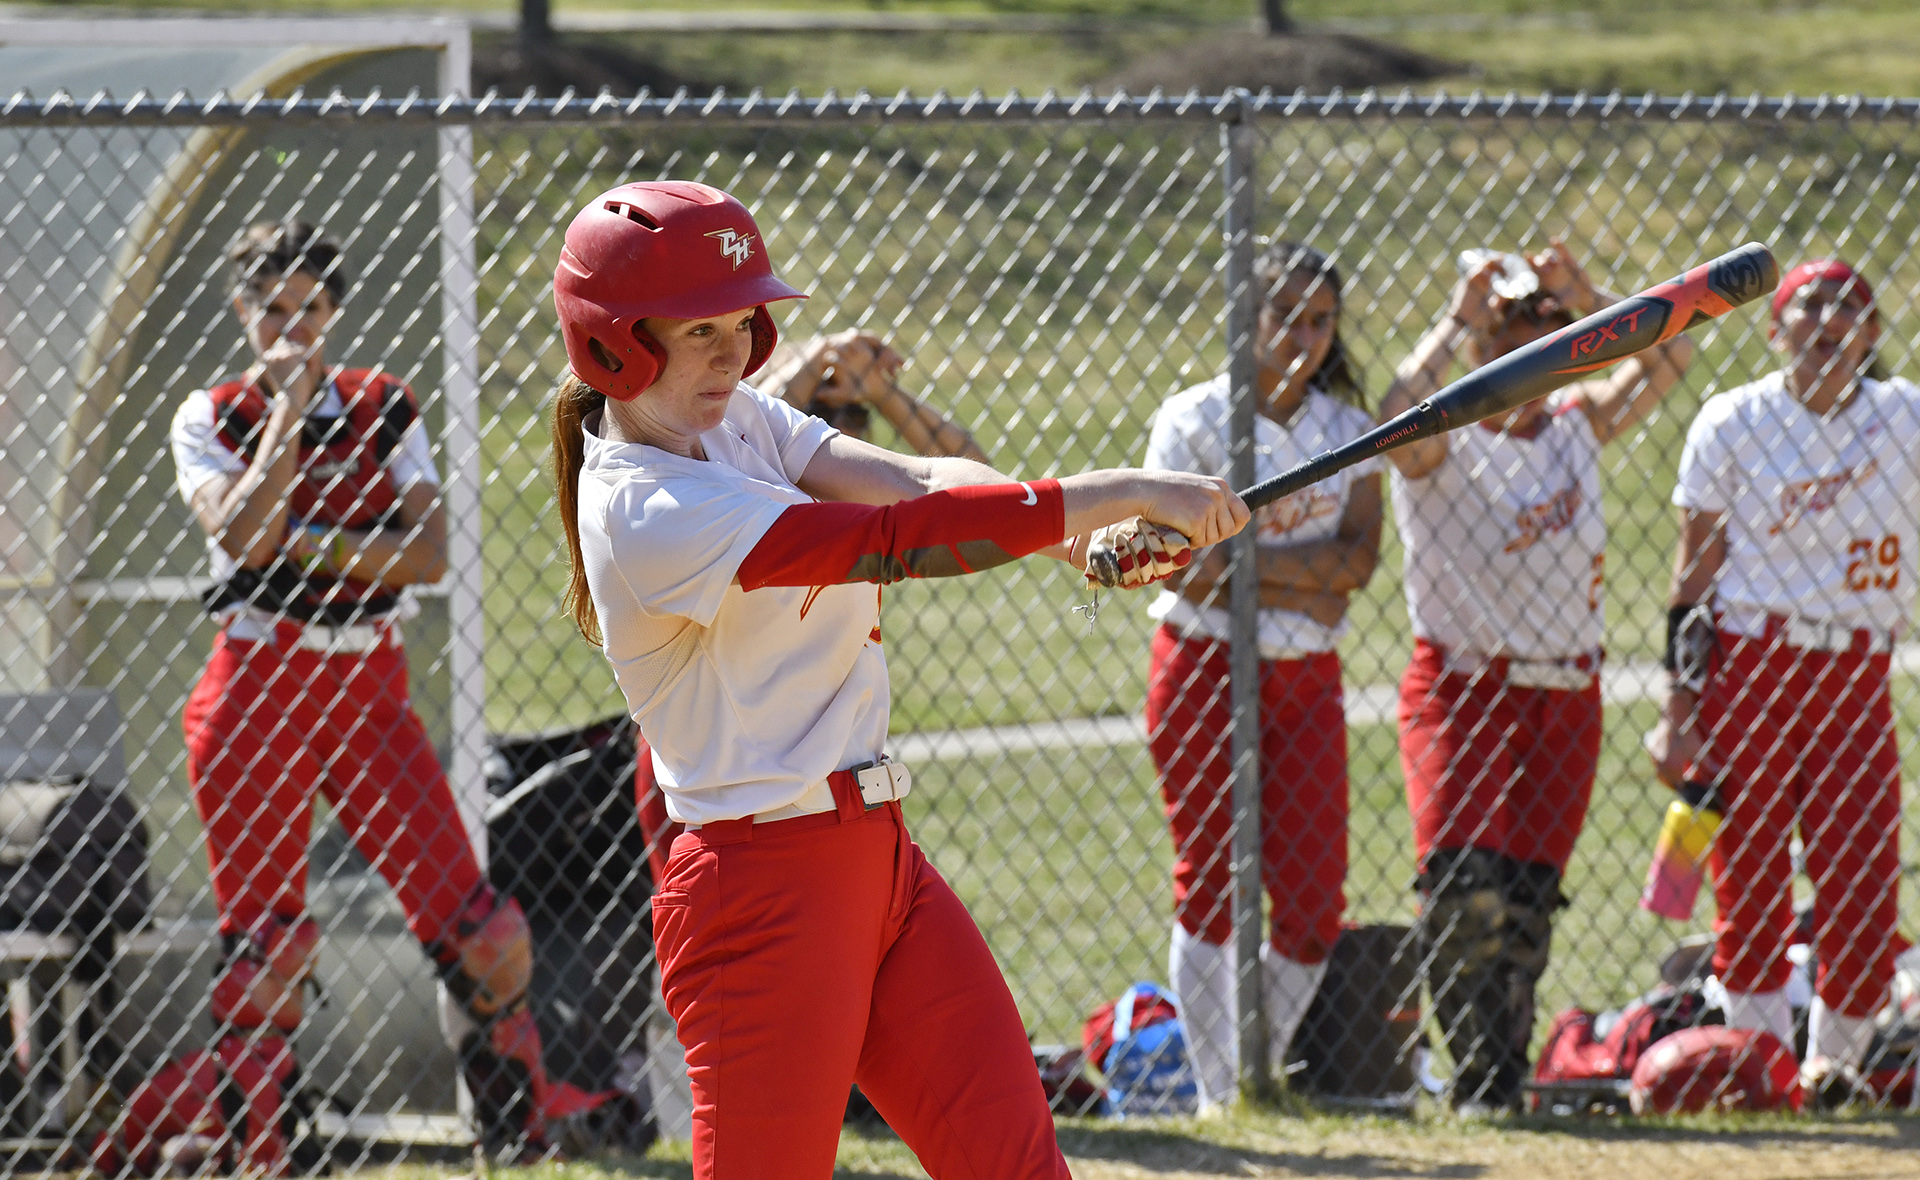 The CHC Softball team recorded their 13th consecutive ASR of 100%. They are just one of two CHC programs, joining Women's Lacrosse, to produce a perfect score in each season CHC has submitted data to the NCAA.